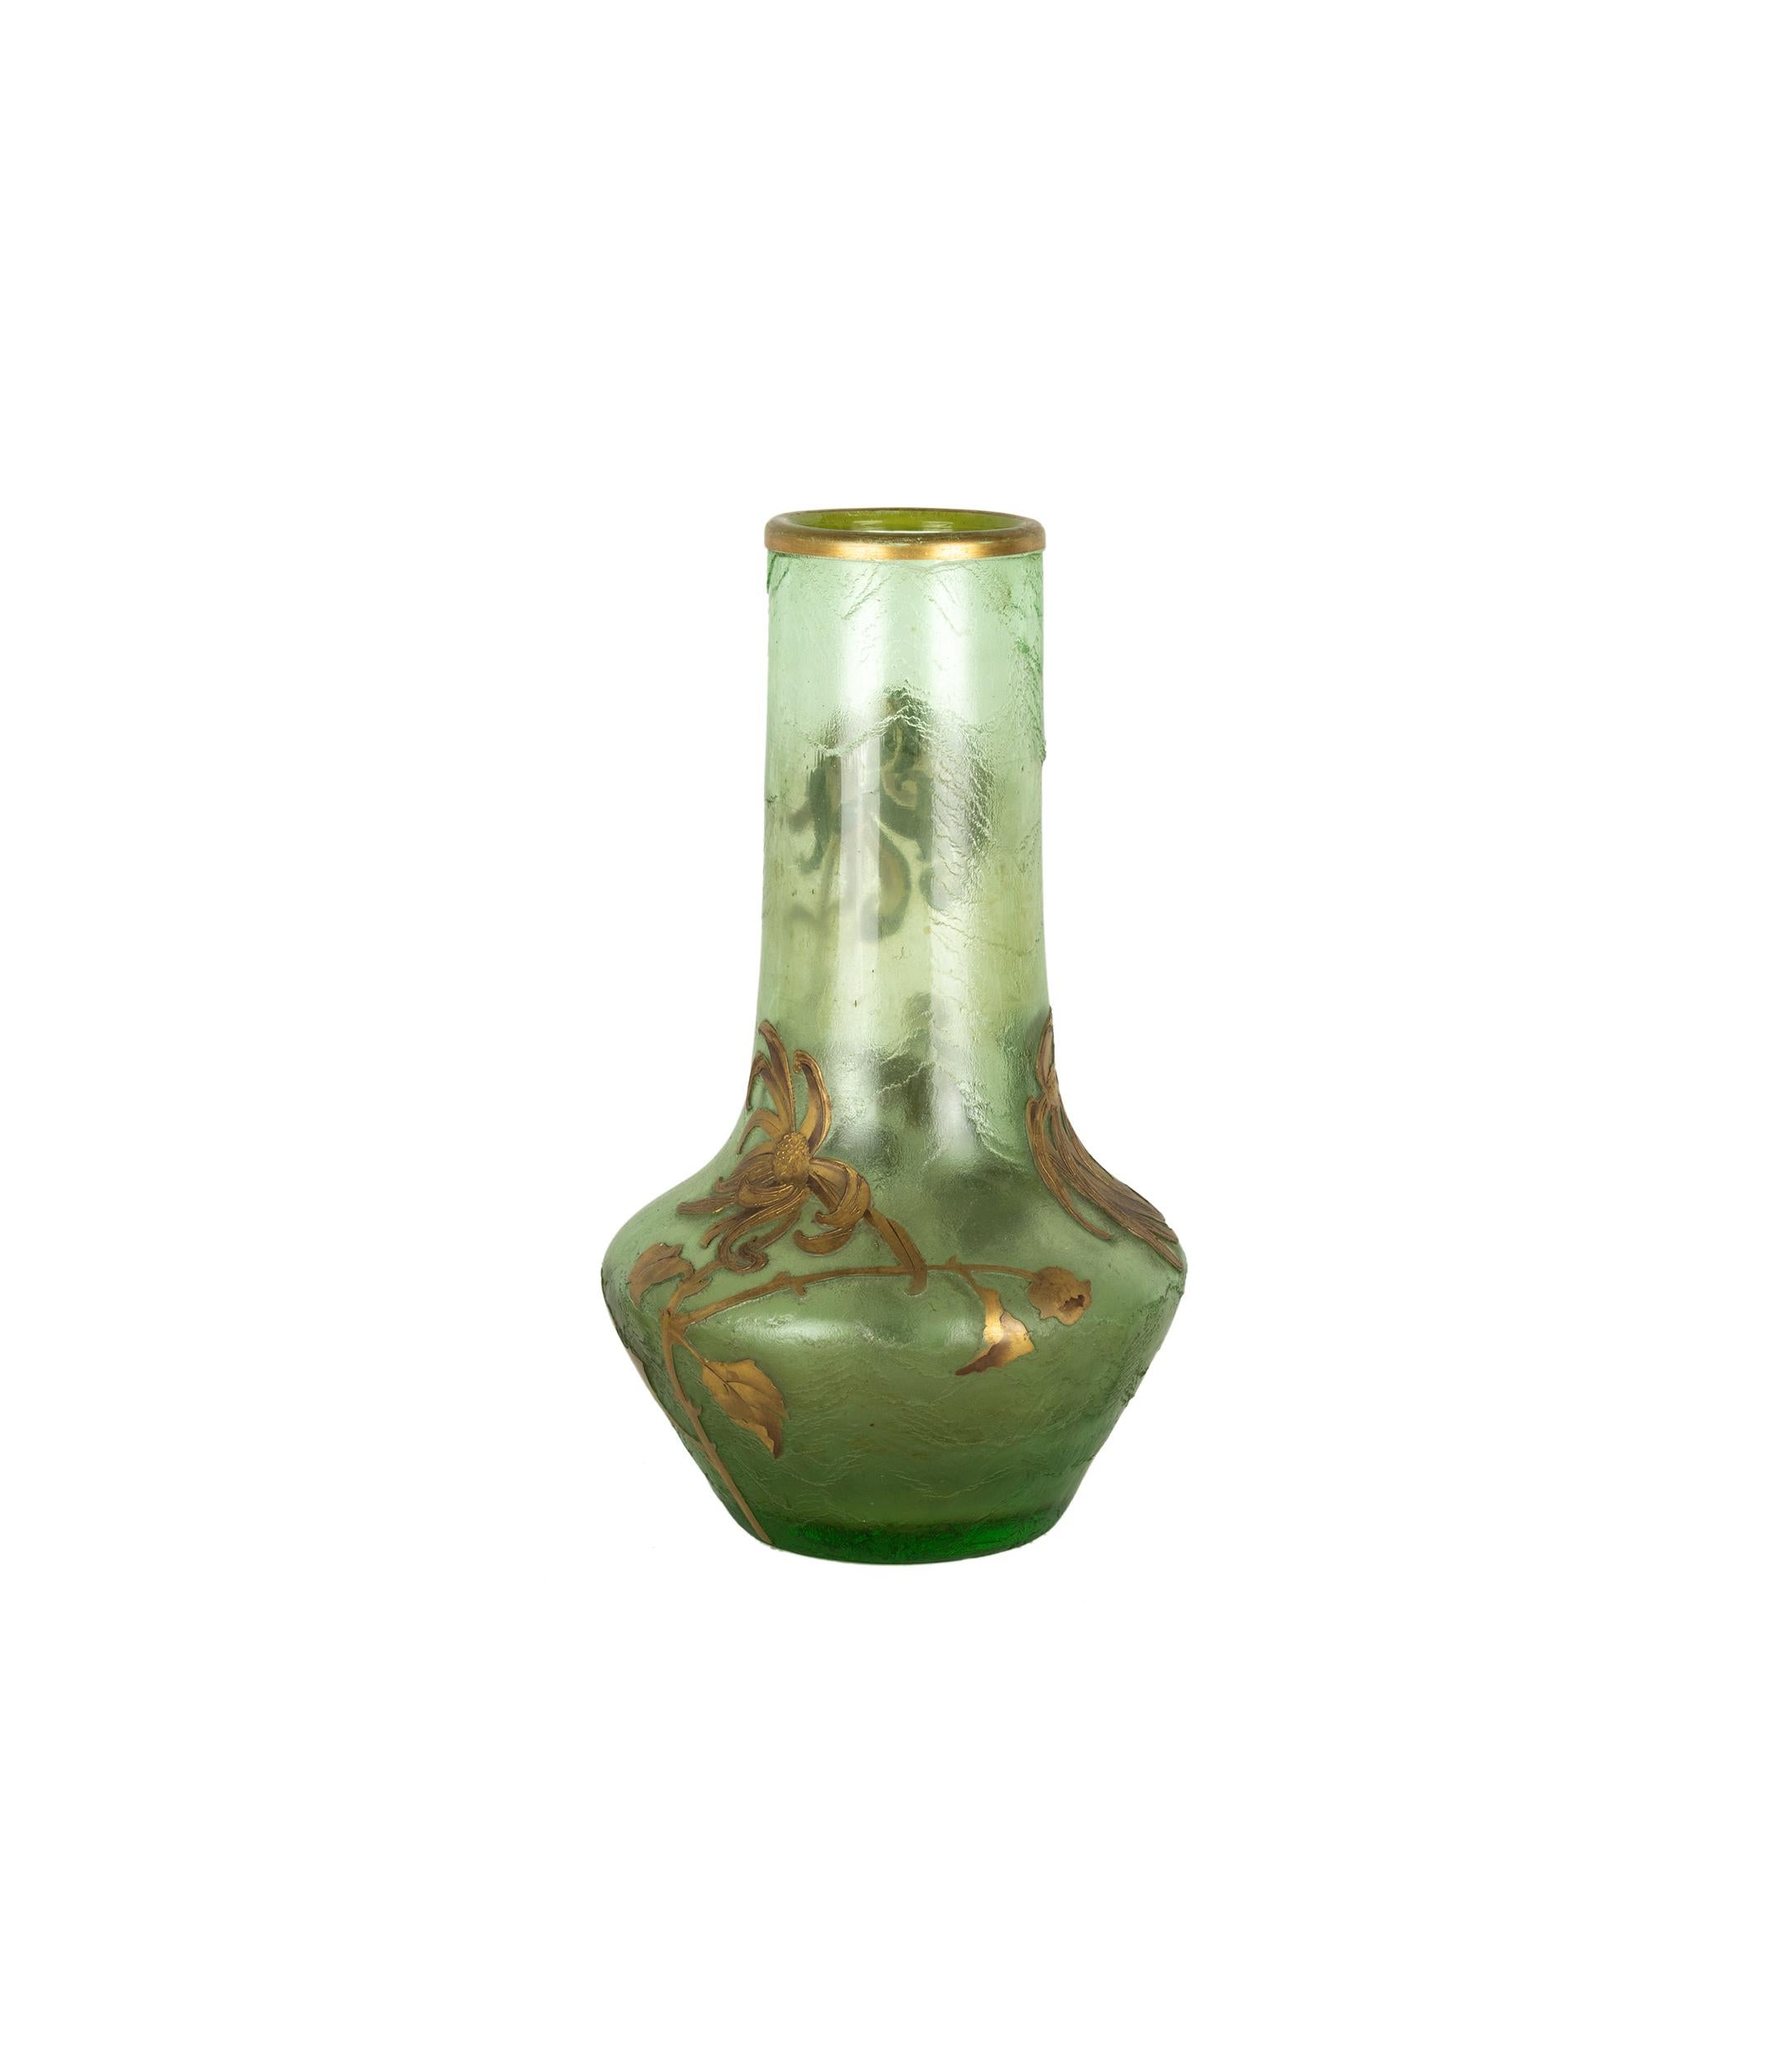 French Montjoye, France, Large Art Nouveau Vase in Mouth-Blown Art Glass, 1880-1900 For Sale